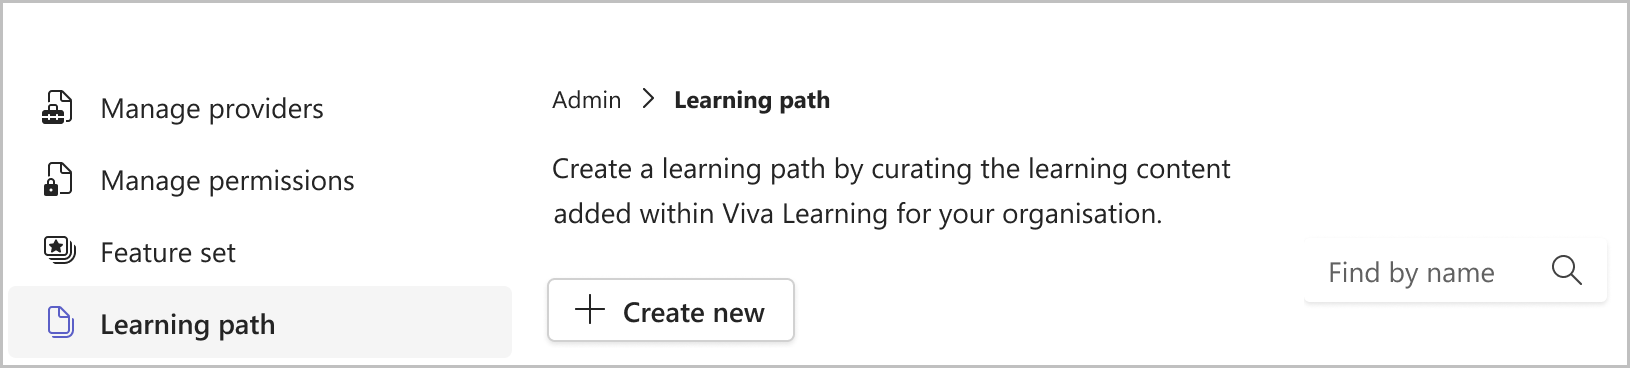 Image of the Learning Path navigation on the admin tab.